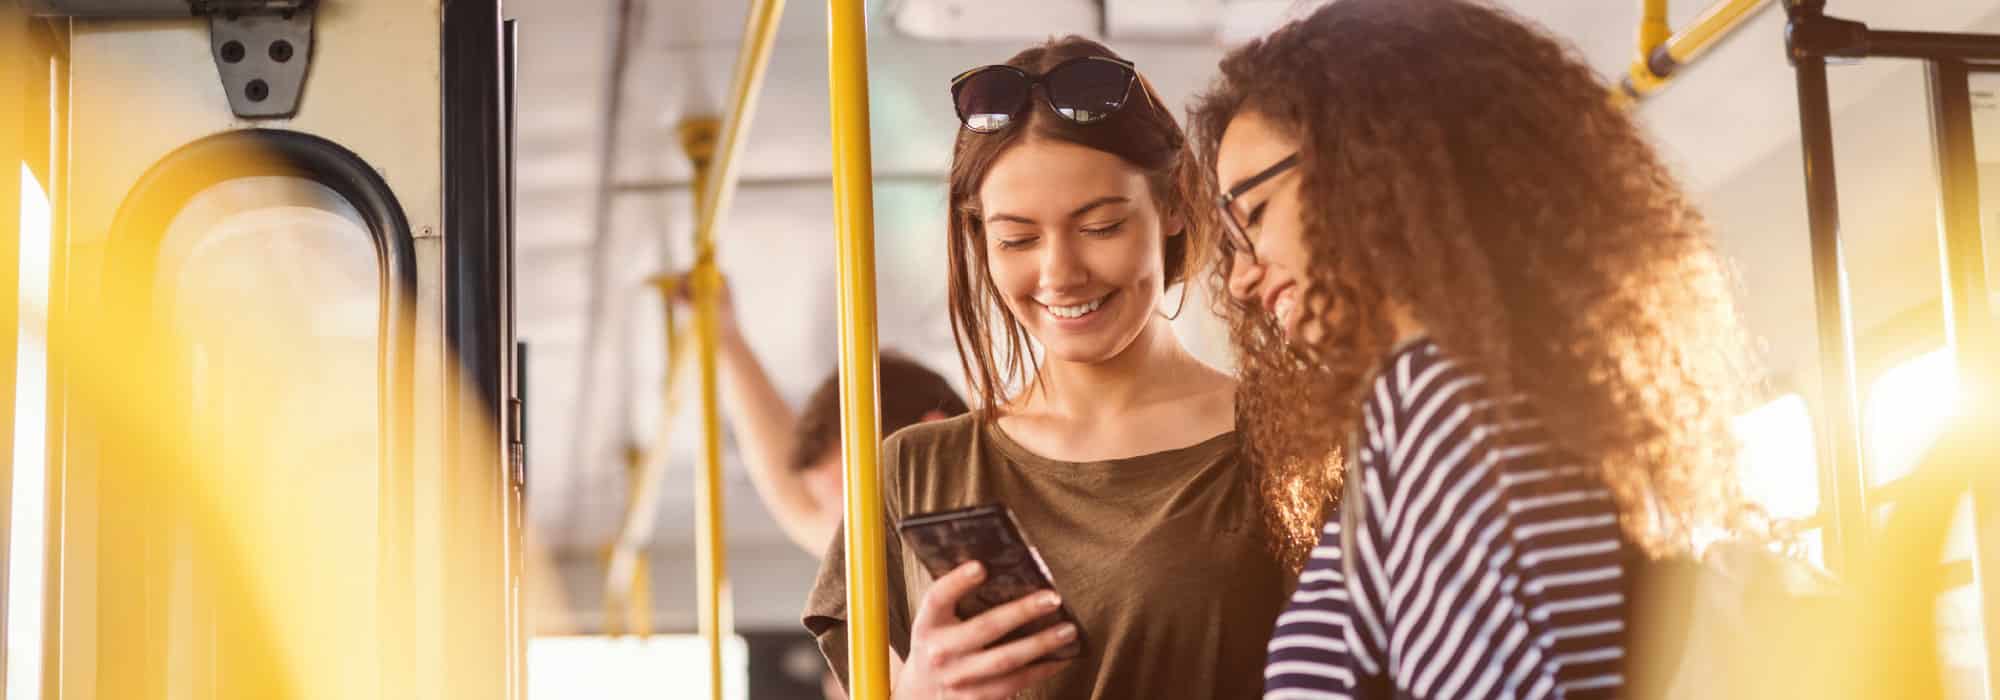 Two girls stand on public transportation and are smiling down at a phone.